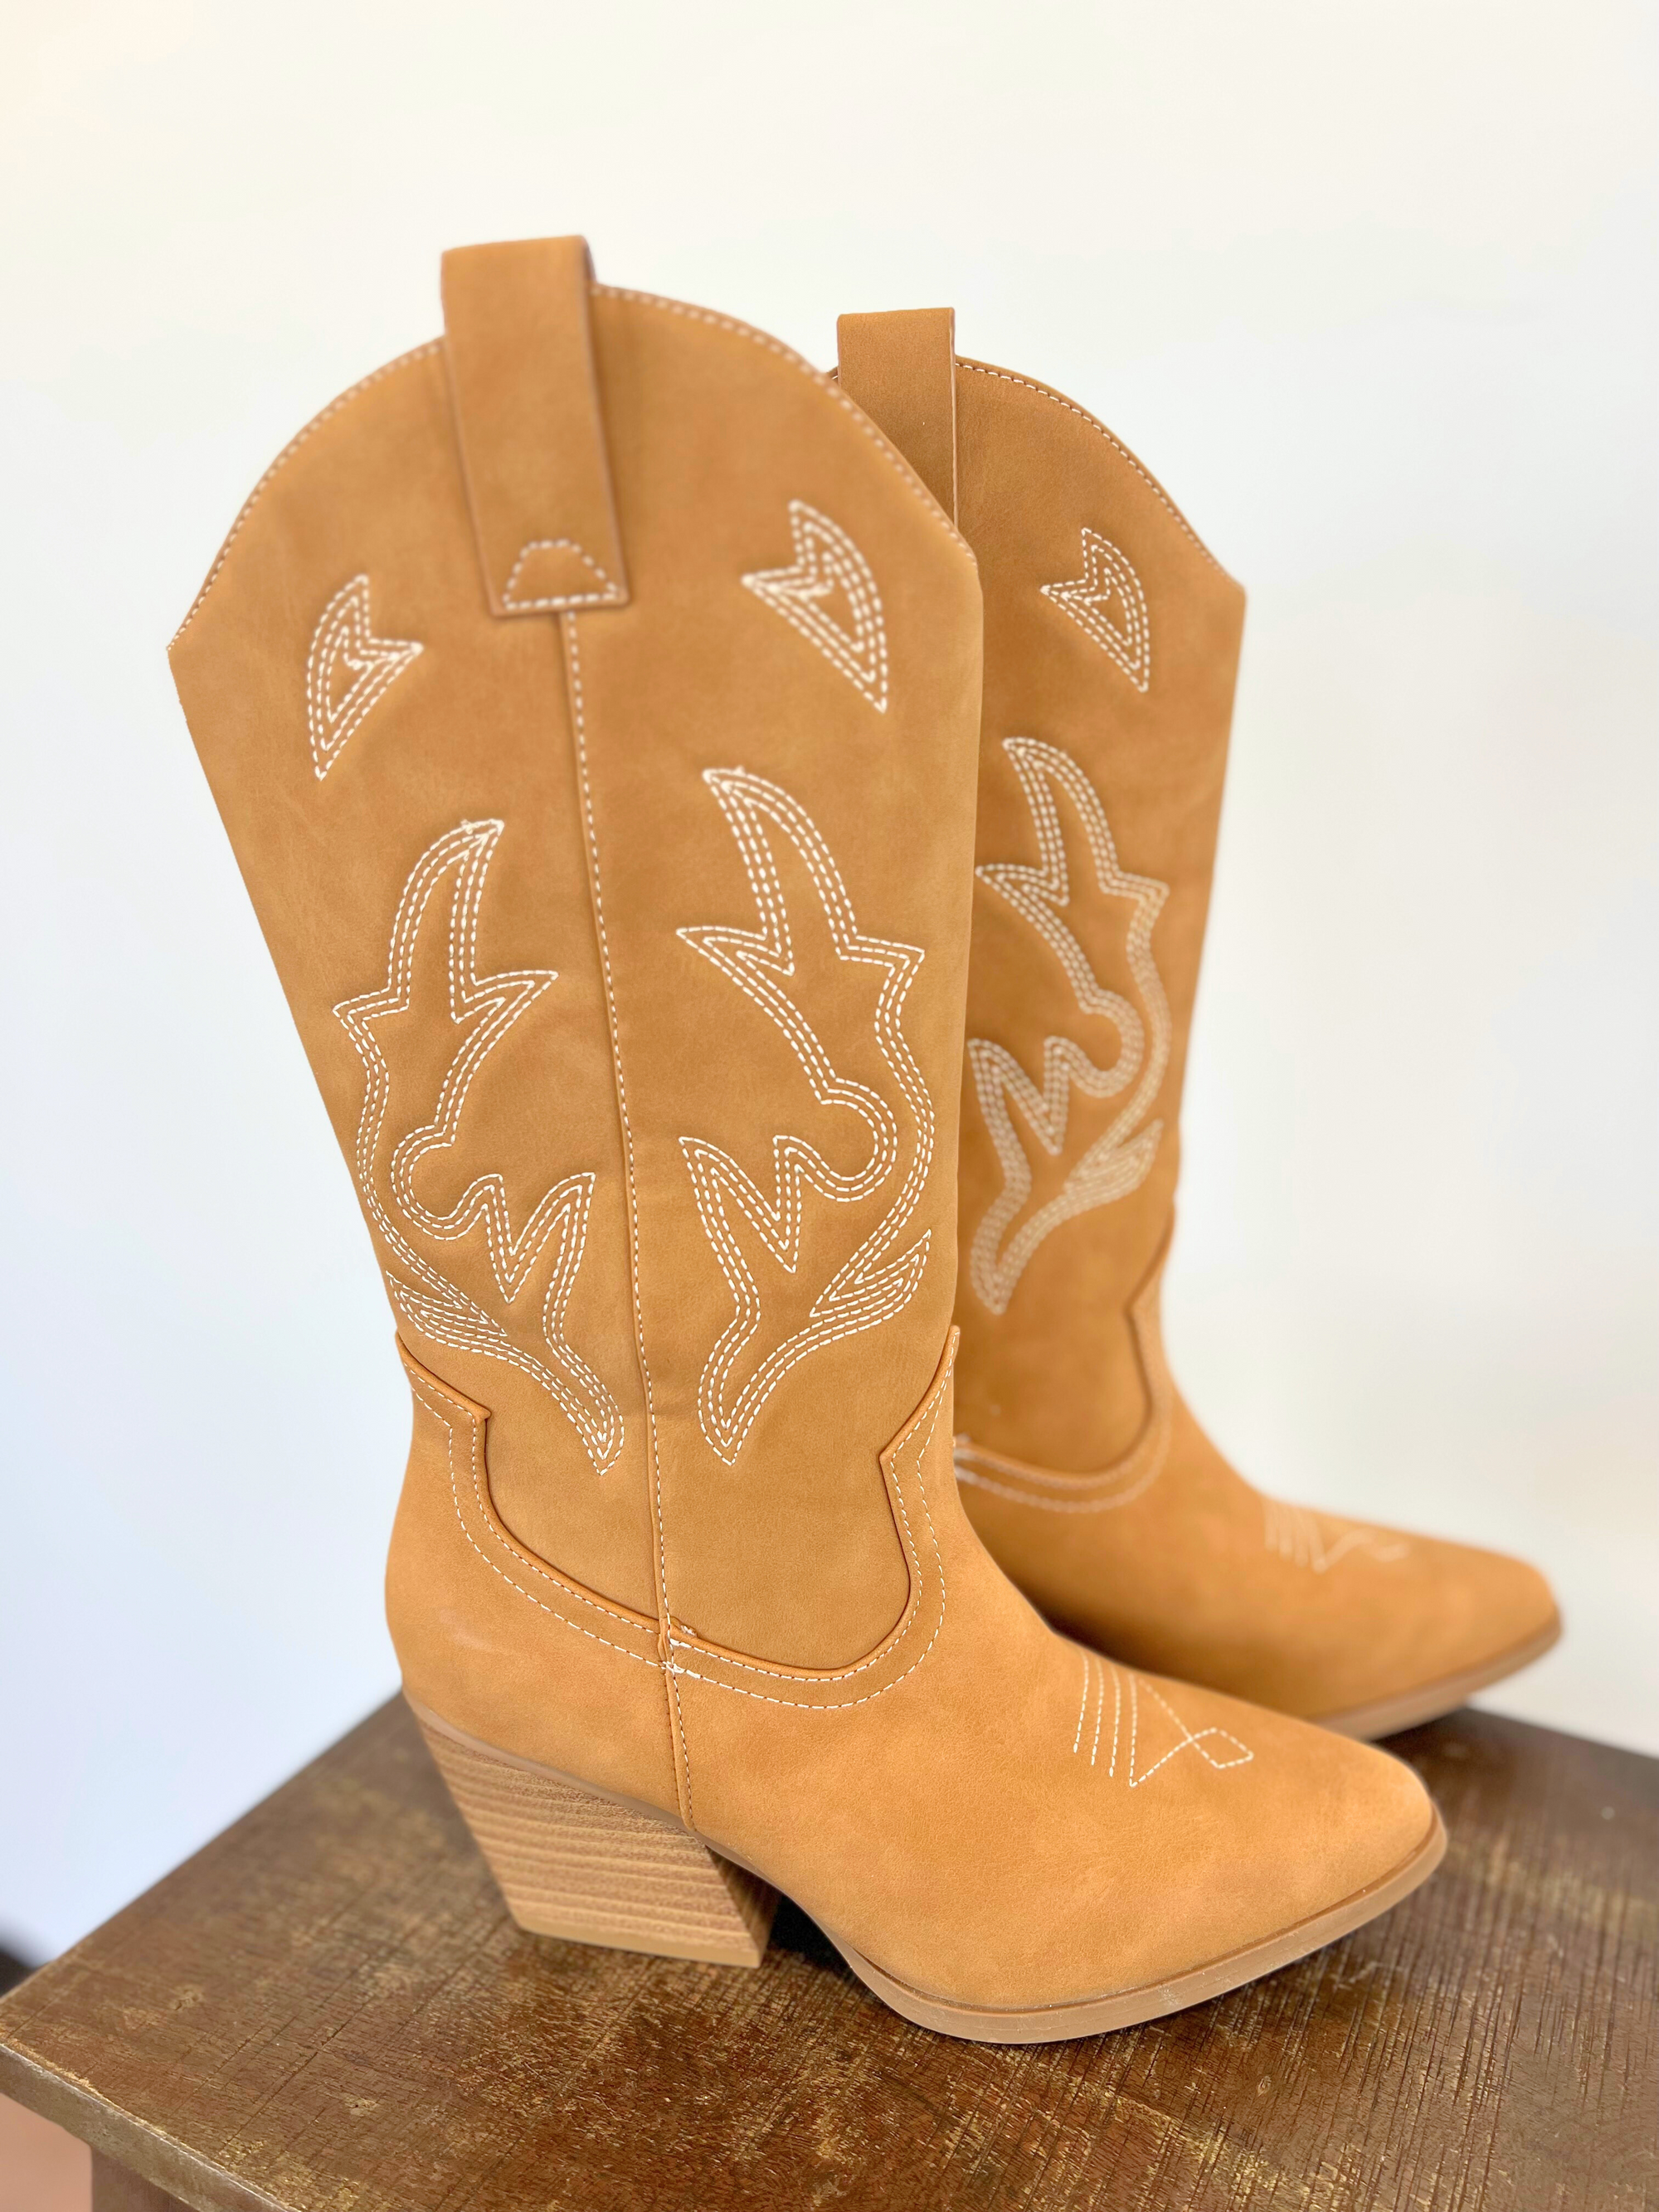 The Waylon Embroidered Boots